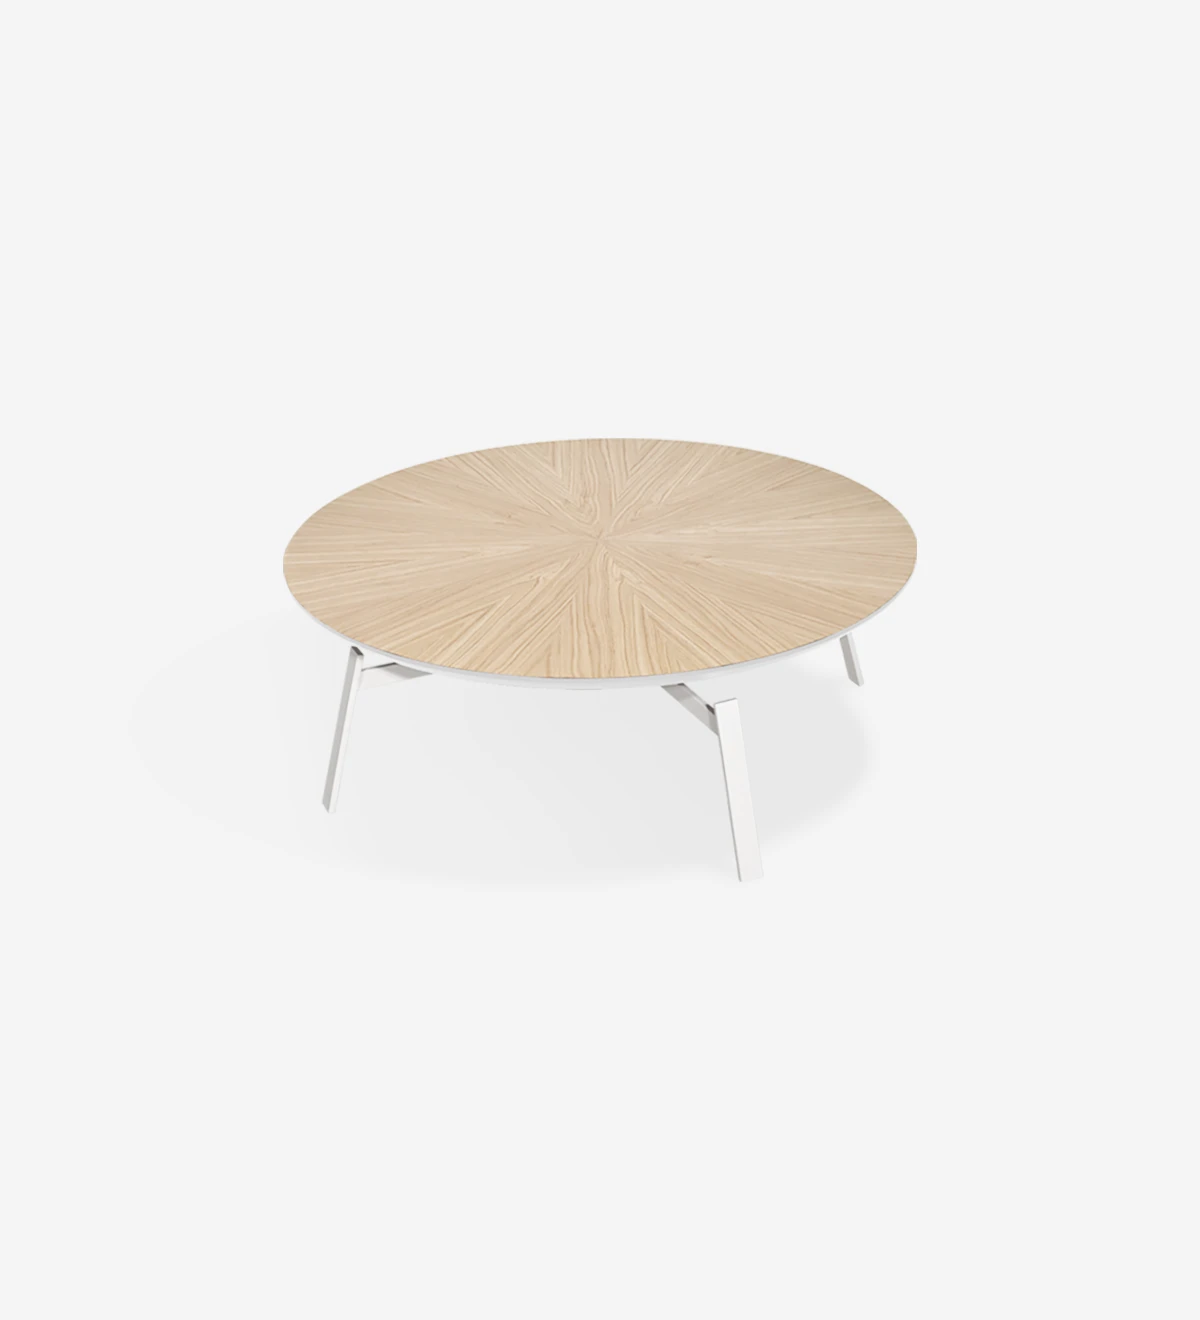 Round center table with natural oak top and pearl lacquered metallic foot